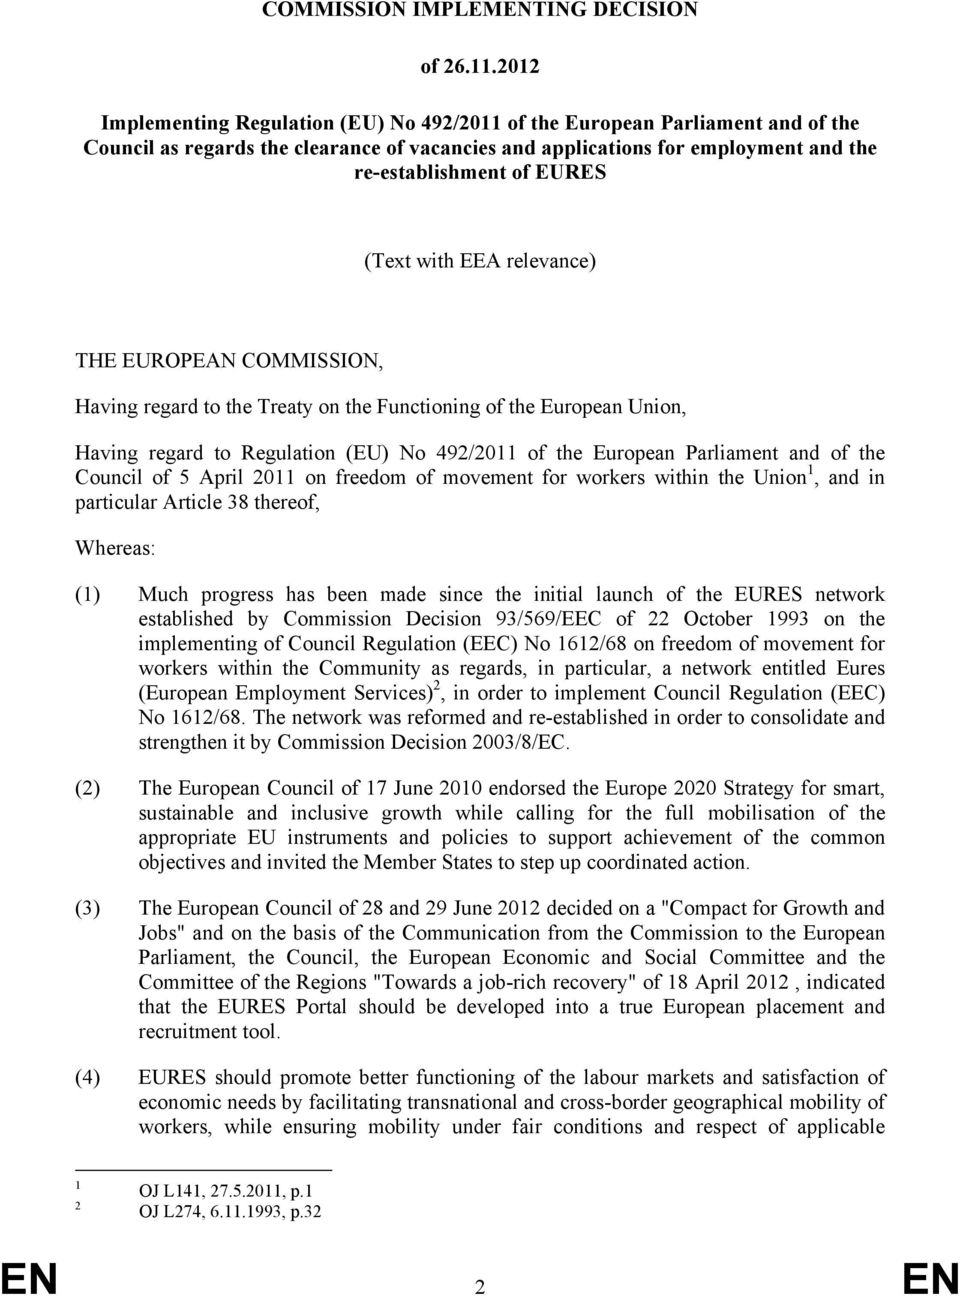 (Text with EEA relevance) THE EUROPEAN COMMISSION, Having regard to the Treaty on the Functioning of the European Union, Having regard to Regulation (EU) No 492/2011 of the European Parliament and of